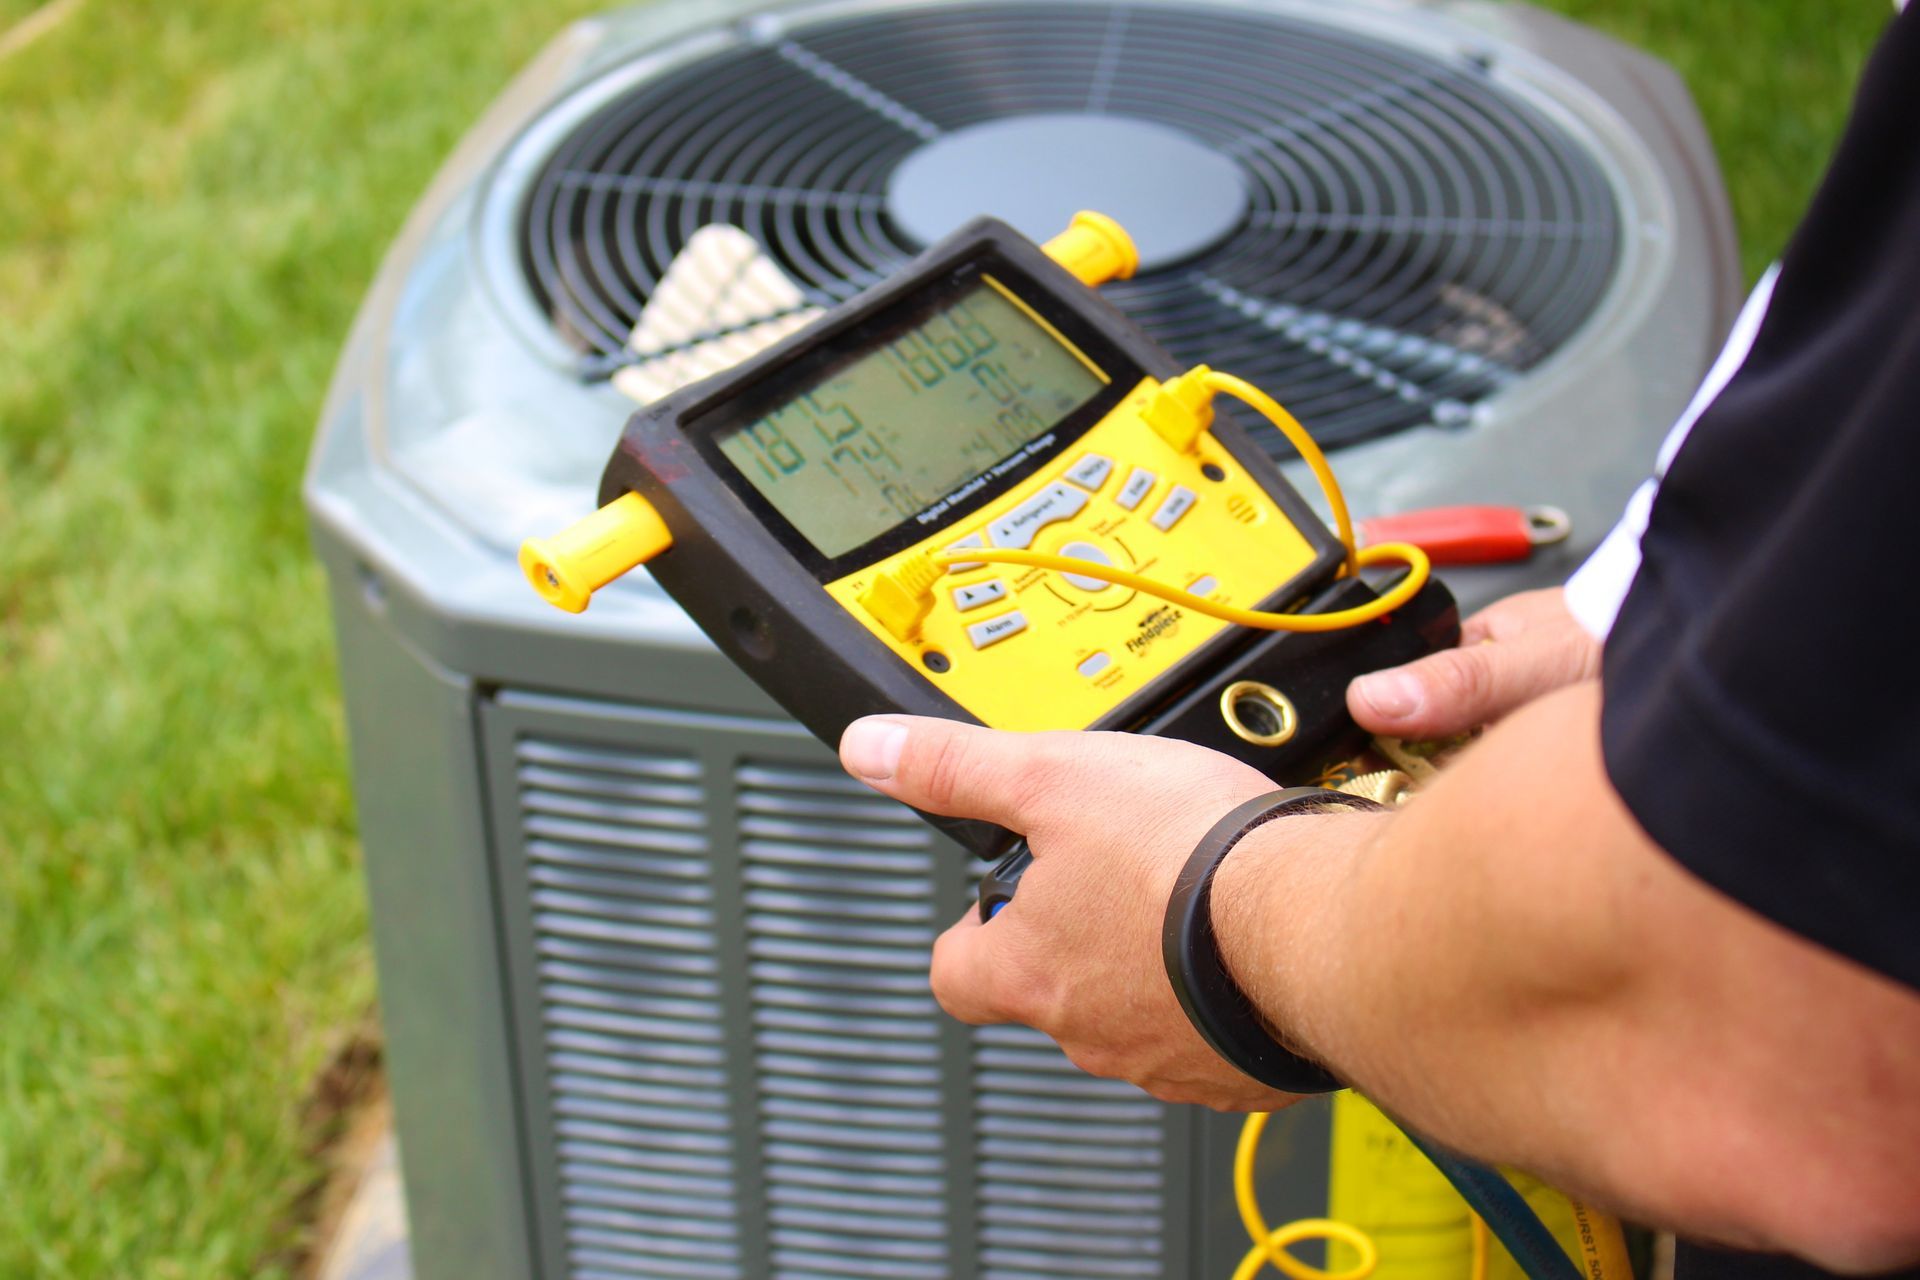 a man is holding a yellow device in front of an air conditioner